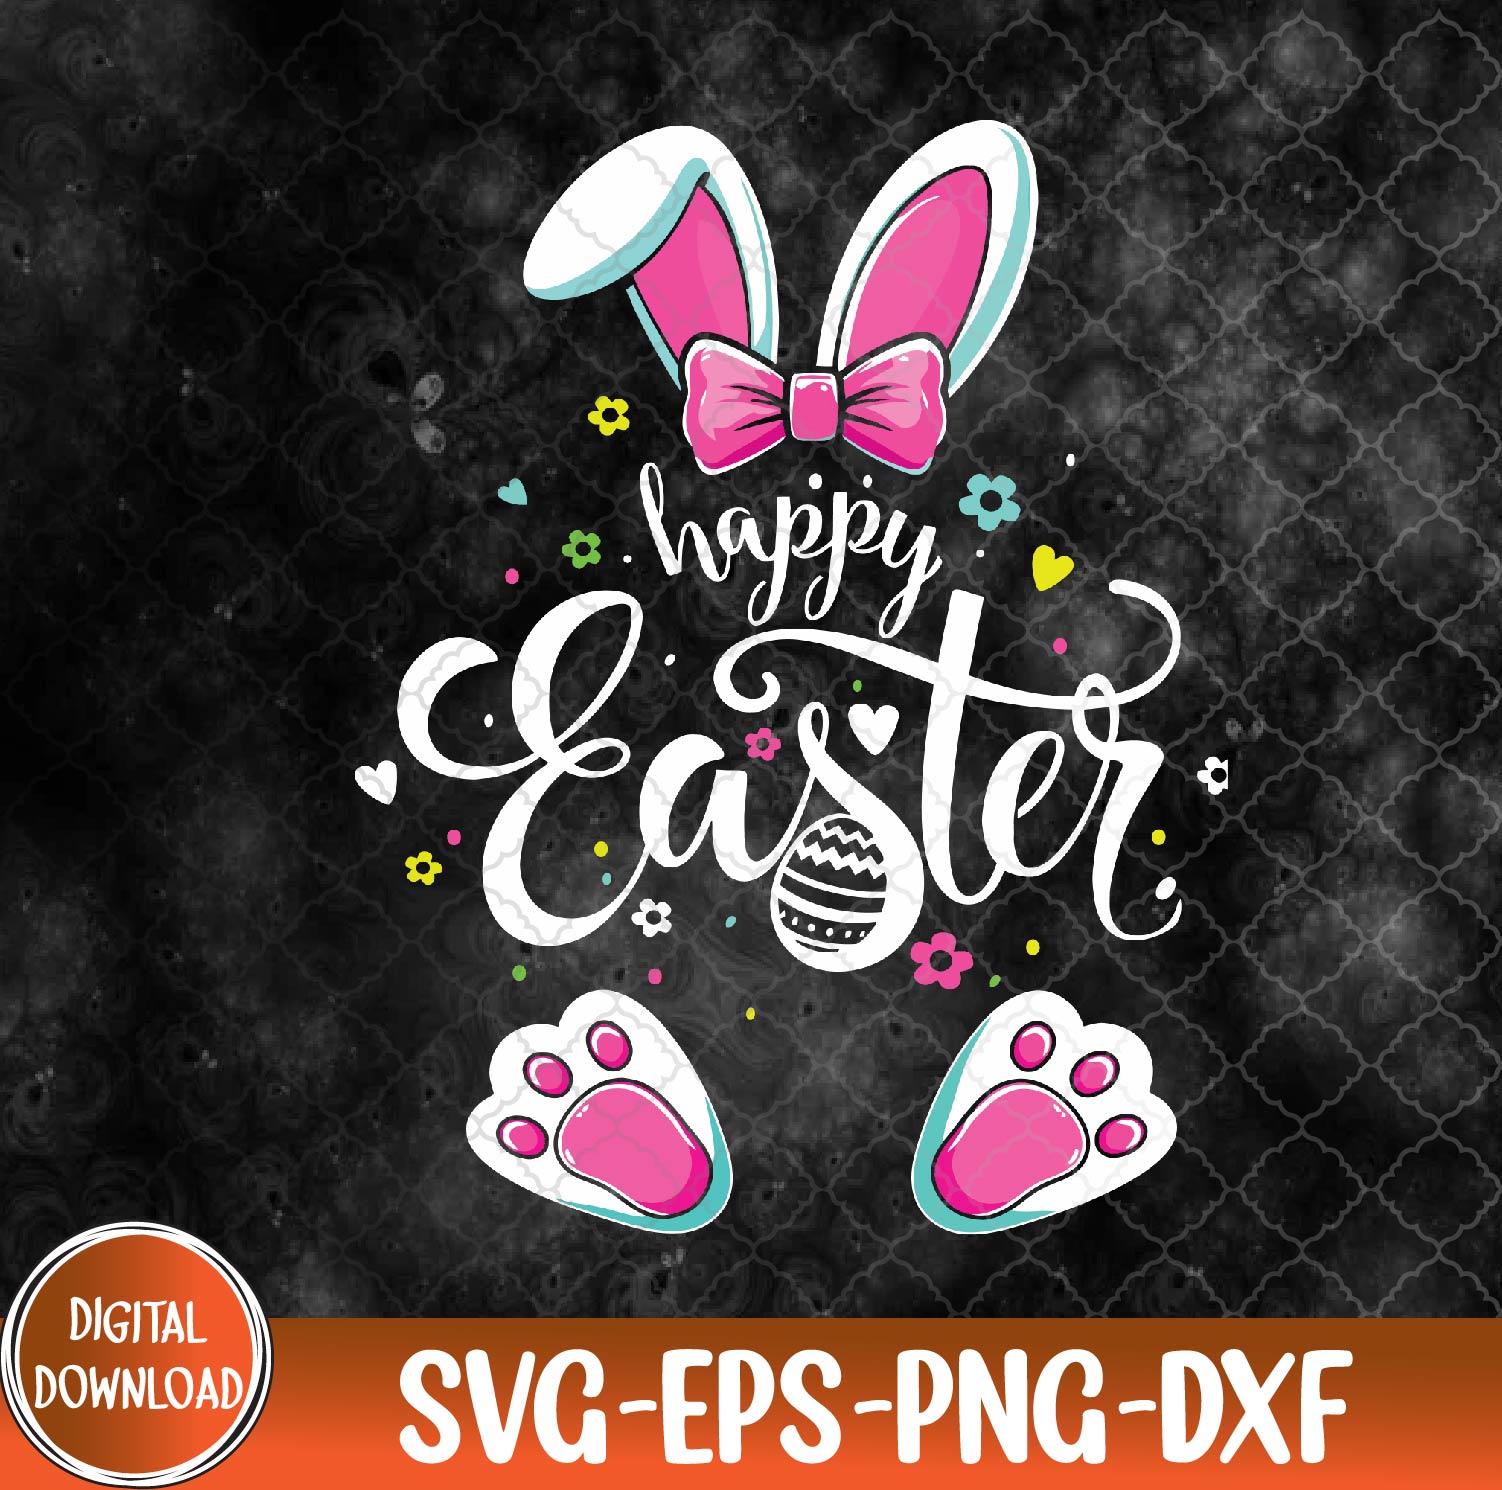 WTMNEW9file 09 26 Easter Happy Easter Day Svg, Eps, Png, Dxf